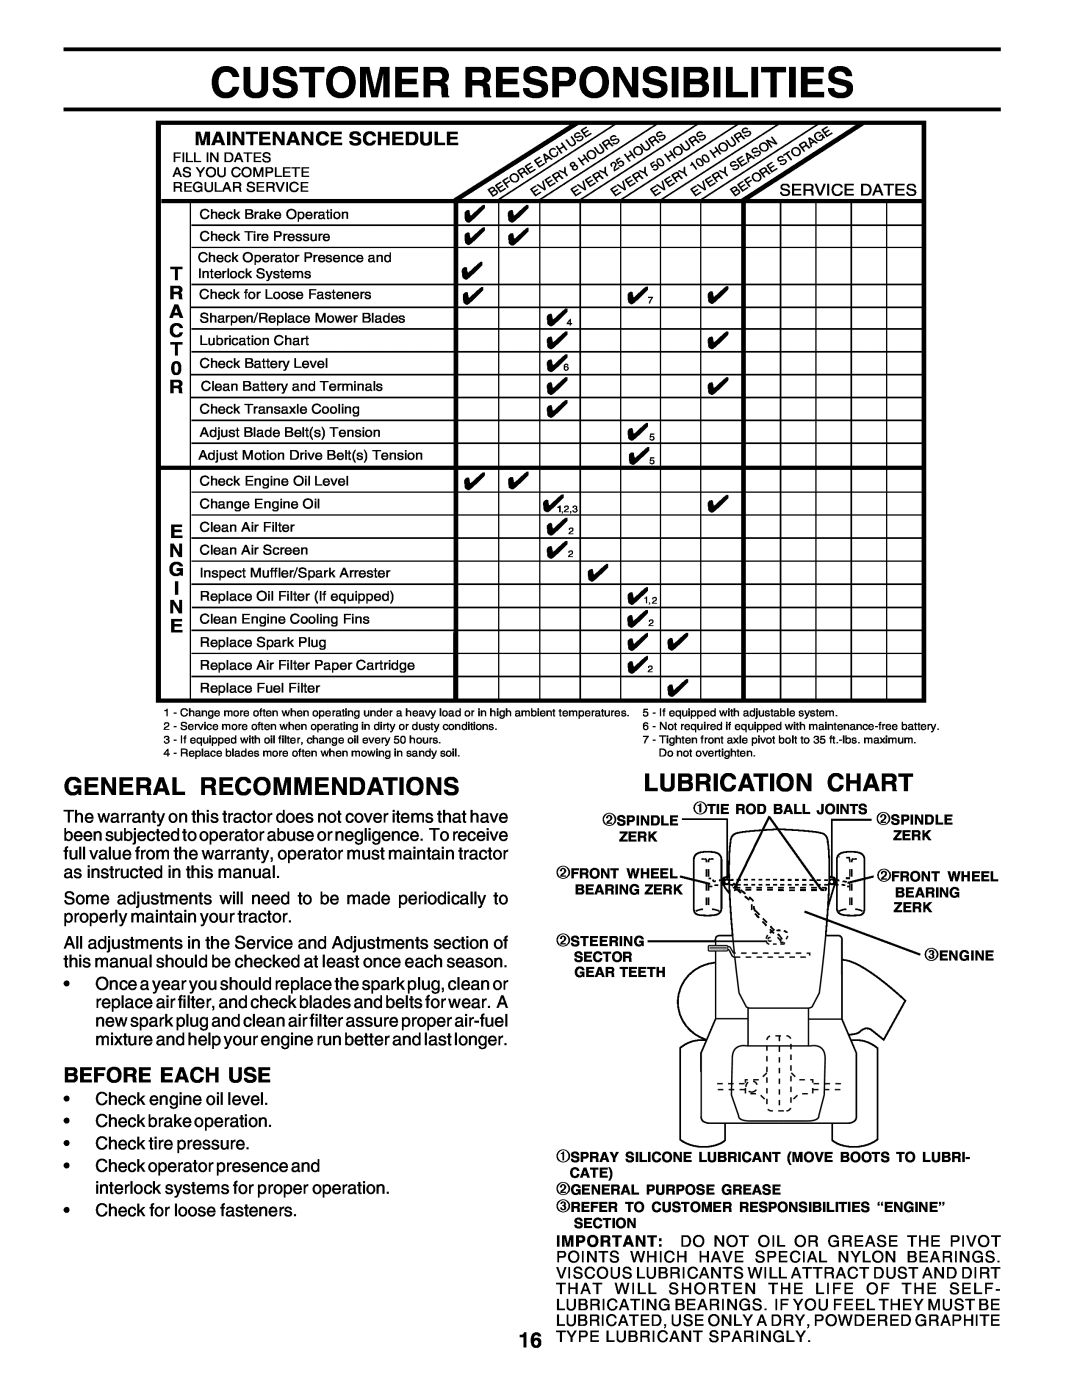 Poulan 177937 owner manual Customer Responsibilities, General Recommendations, Lubrication Chart ¡, Before Each Use 